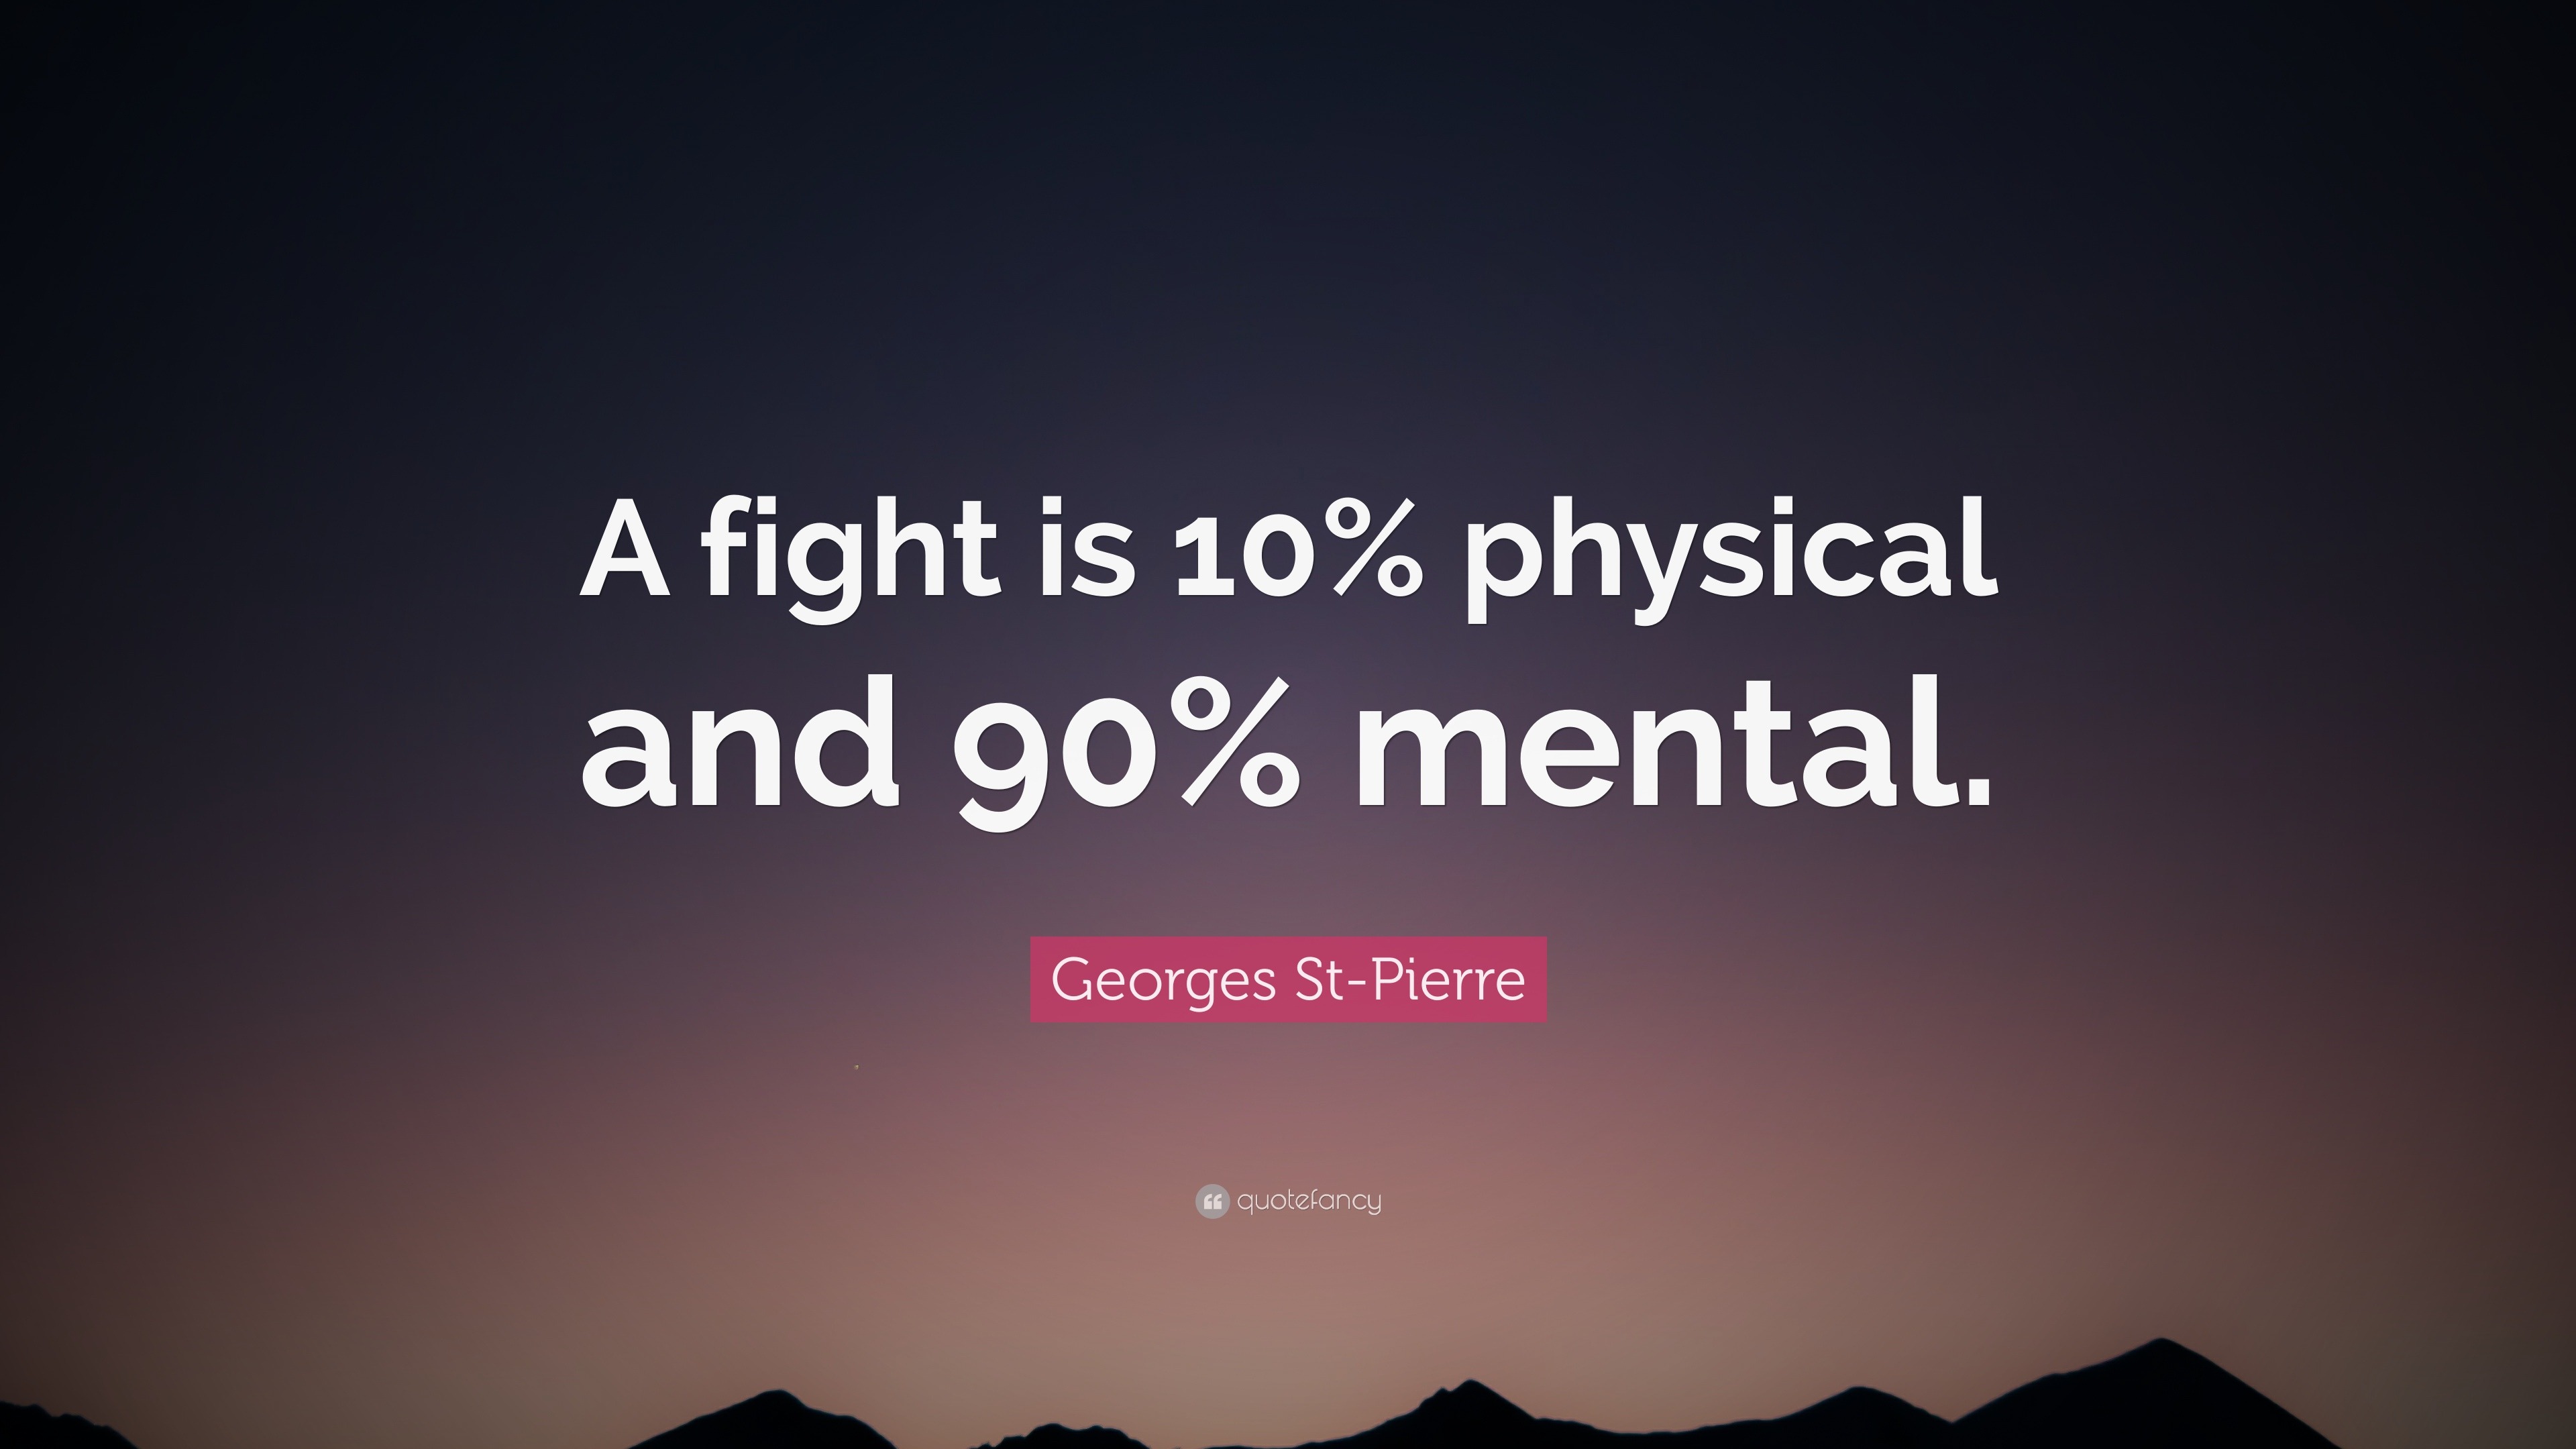 Georges St Pierre Quote: A fight is 10% physical and 90% mental